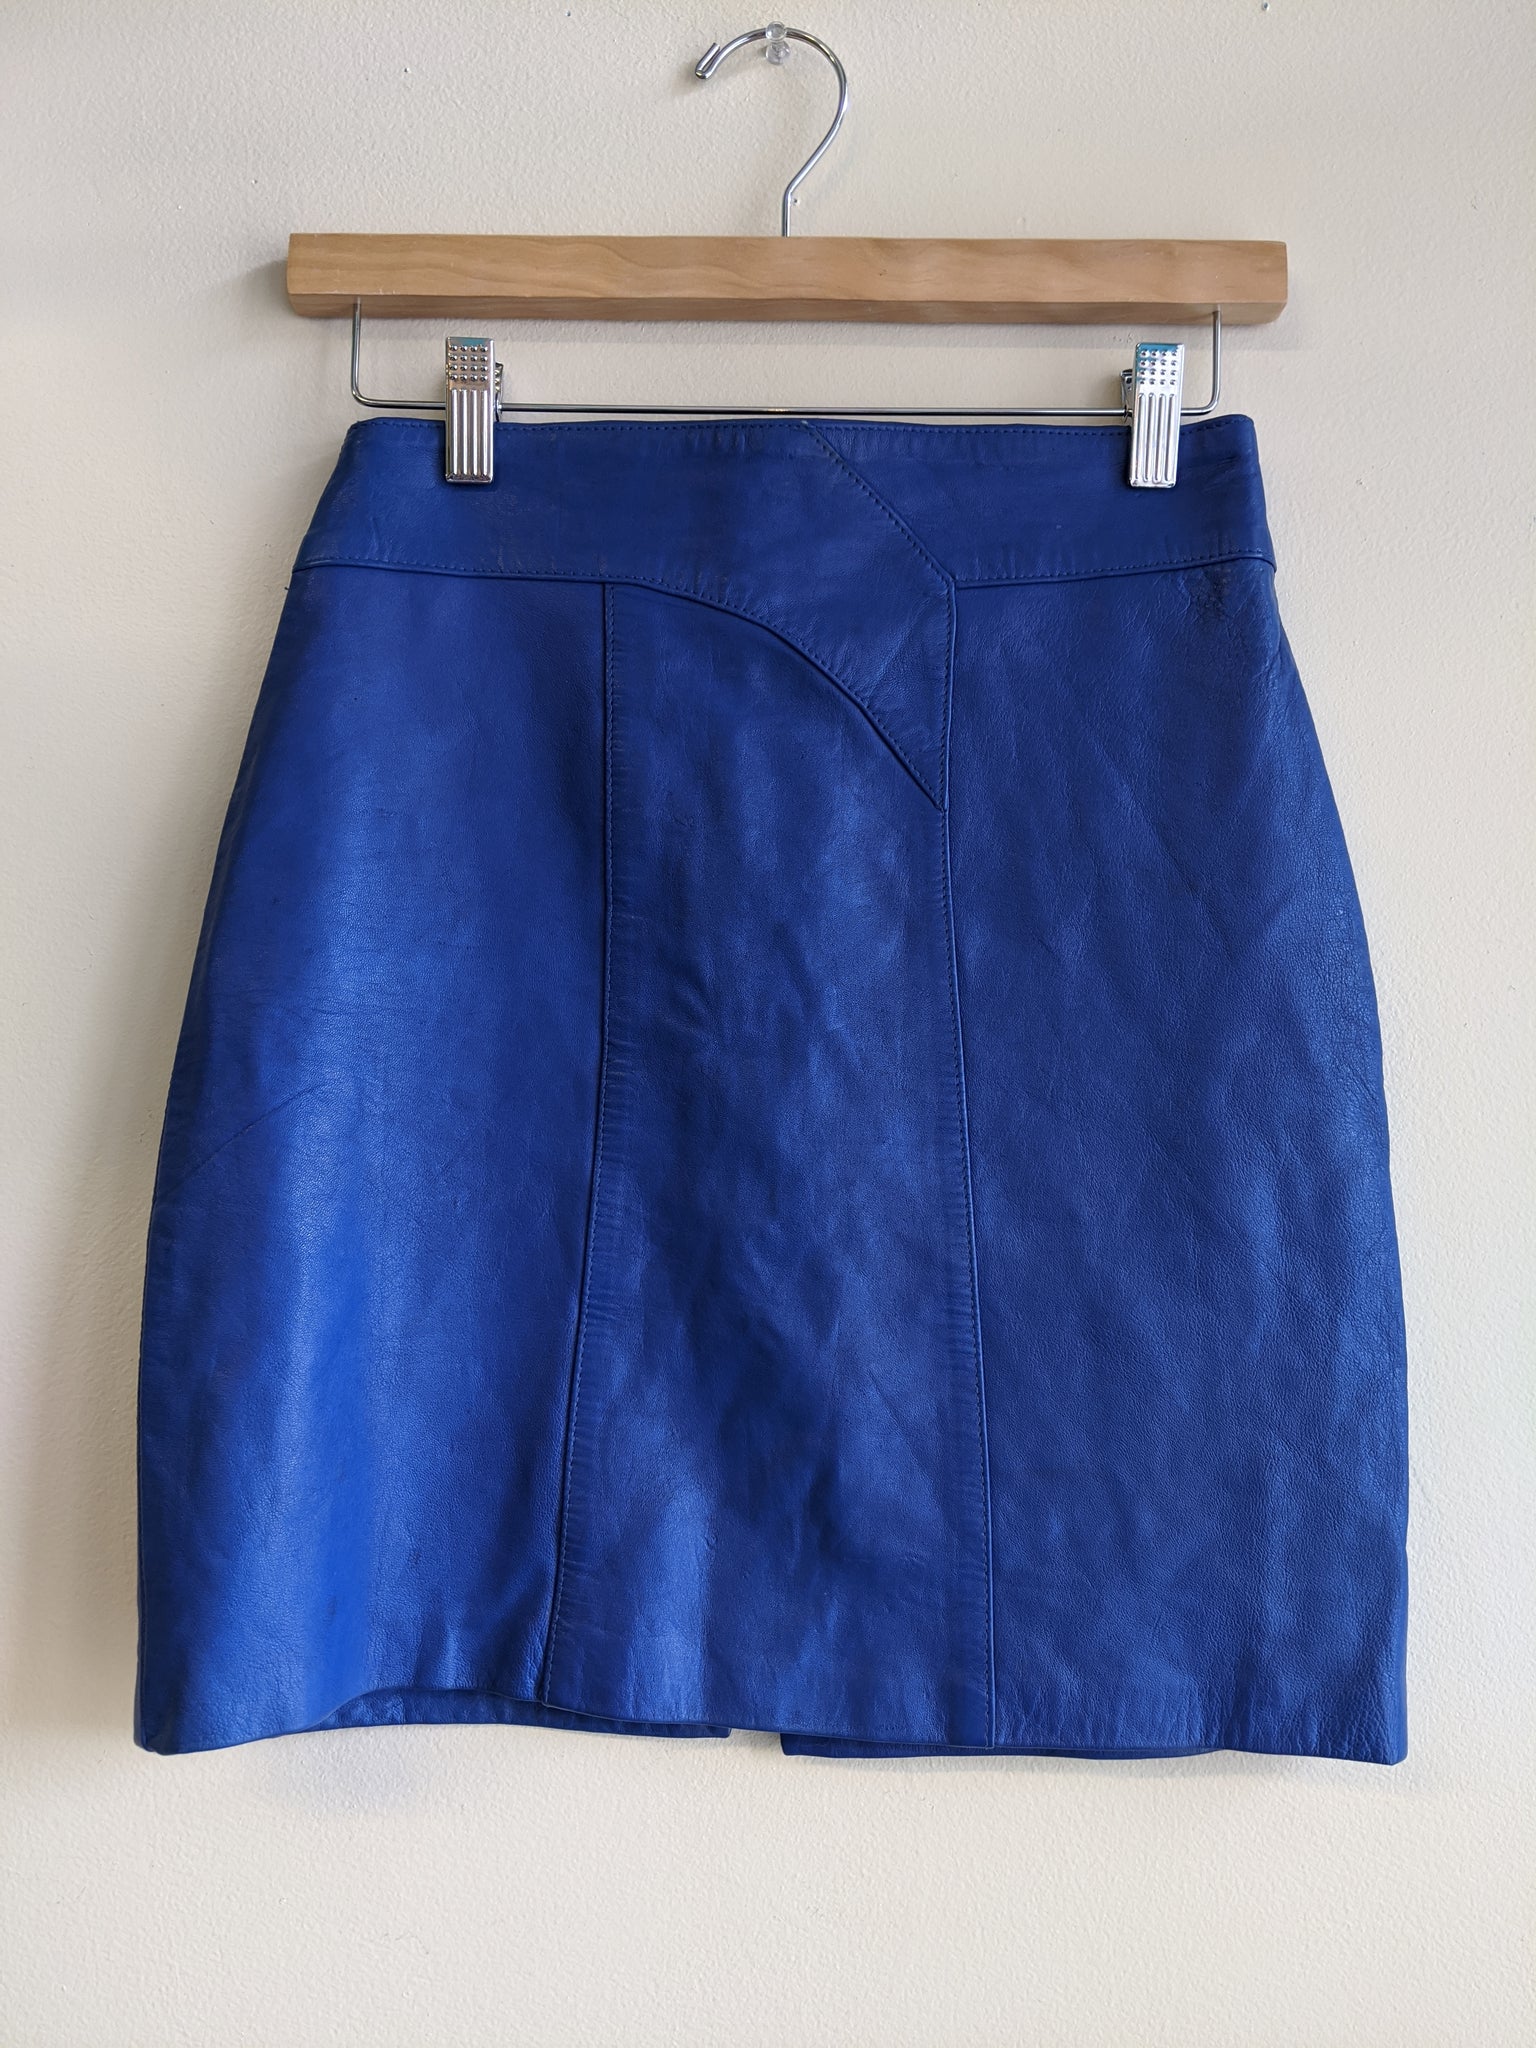 1980’s Blue Leather Skirt